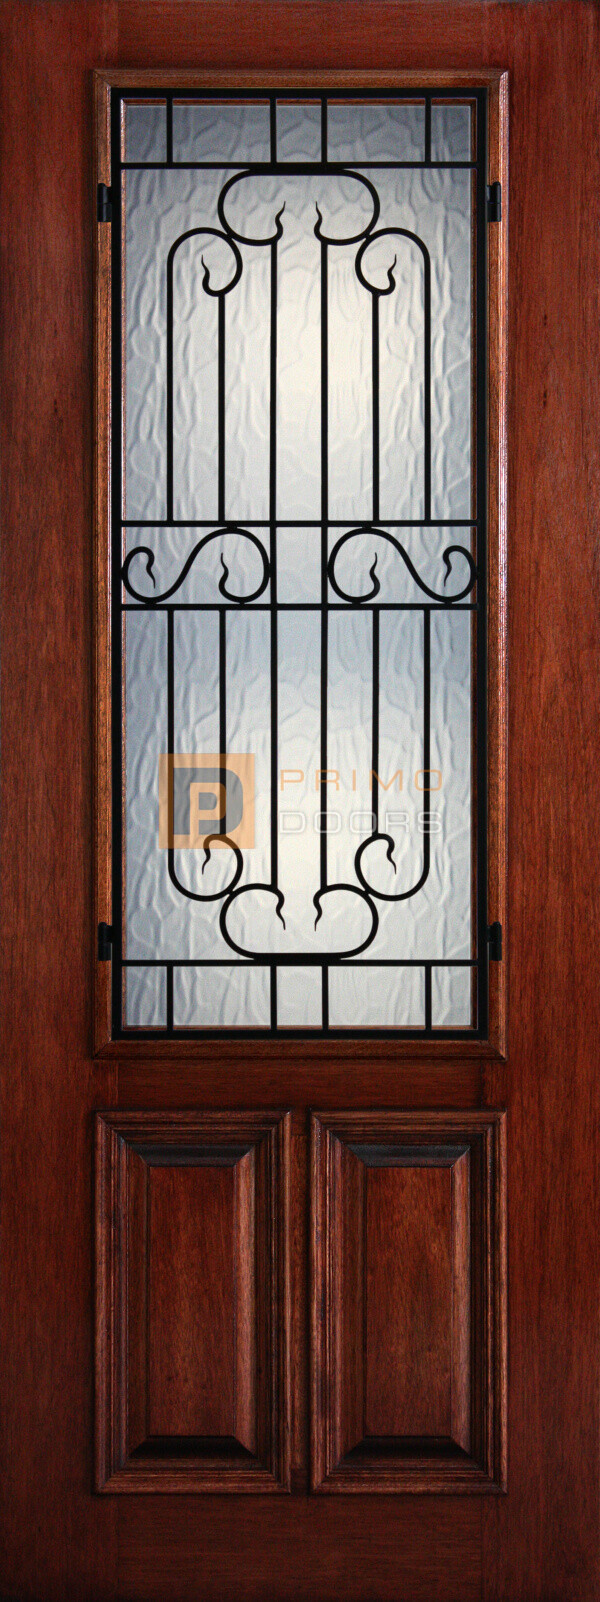 8′ 2/3 Lite Decorative Glass with Iron Grill - Mahogany Single Front Door – PD 3080-23 BERK